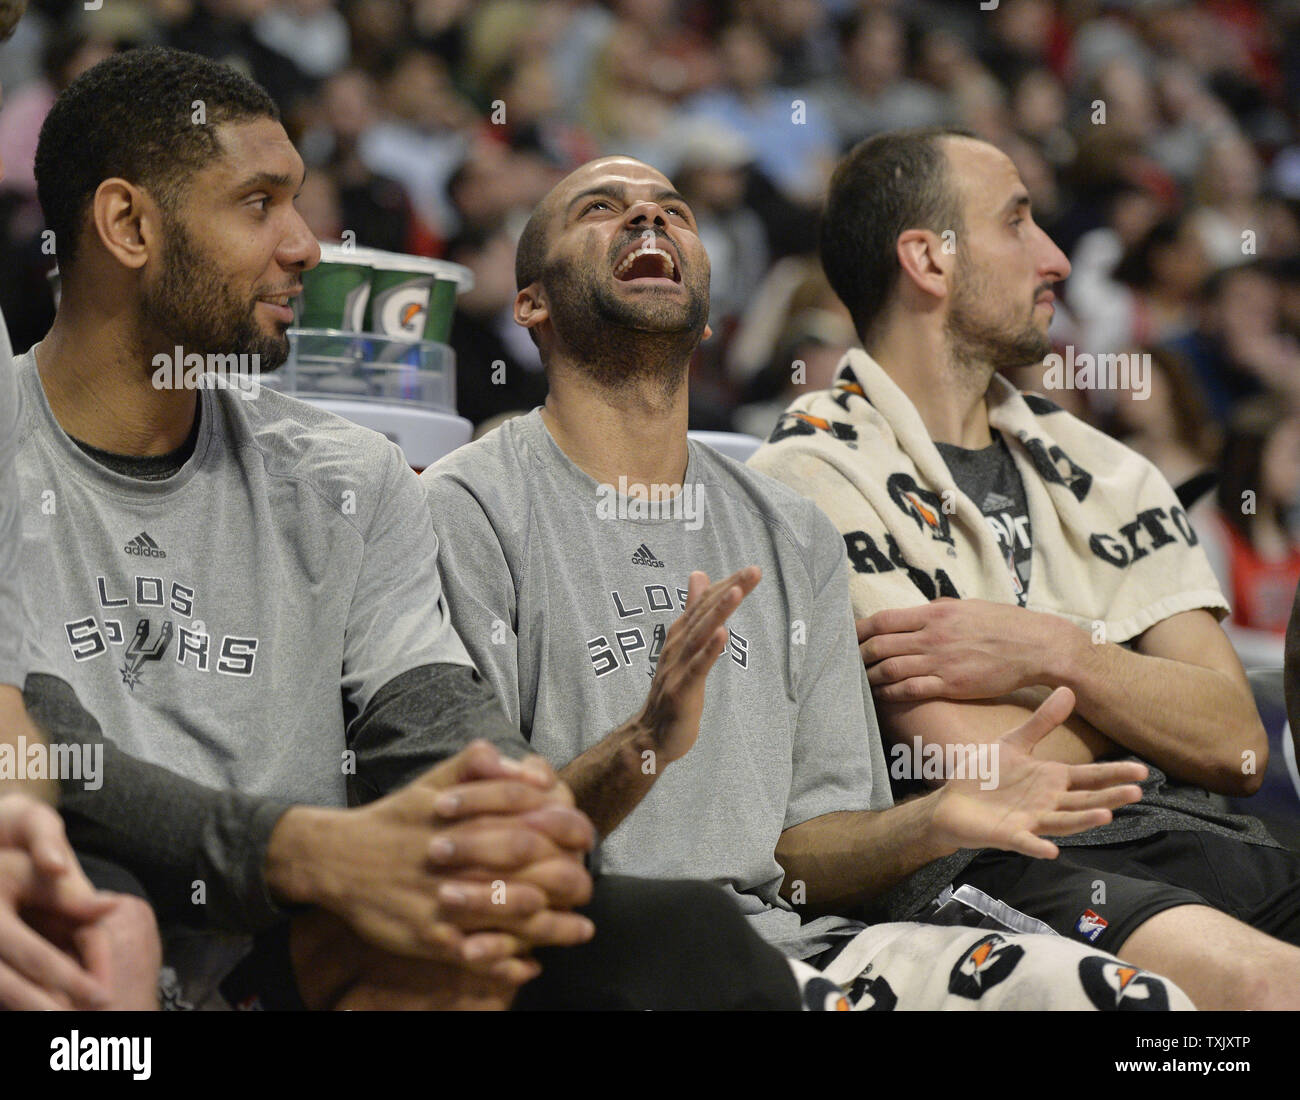 San Antonio Spurs guard Tony Parker (C) laughs as he sits on the bench with forward Tim Duncan (L) and guard Manu Ginobili during the fourth quarter against the Chicago Bulls at the United Center in Chicago on March 11, 2014. The Spurs defeated the Bulls 104-96.     UPI/Brian Kersey Stock Photo